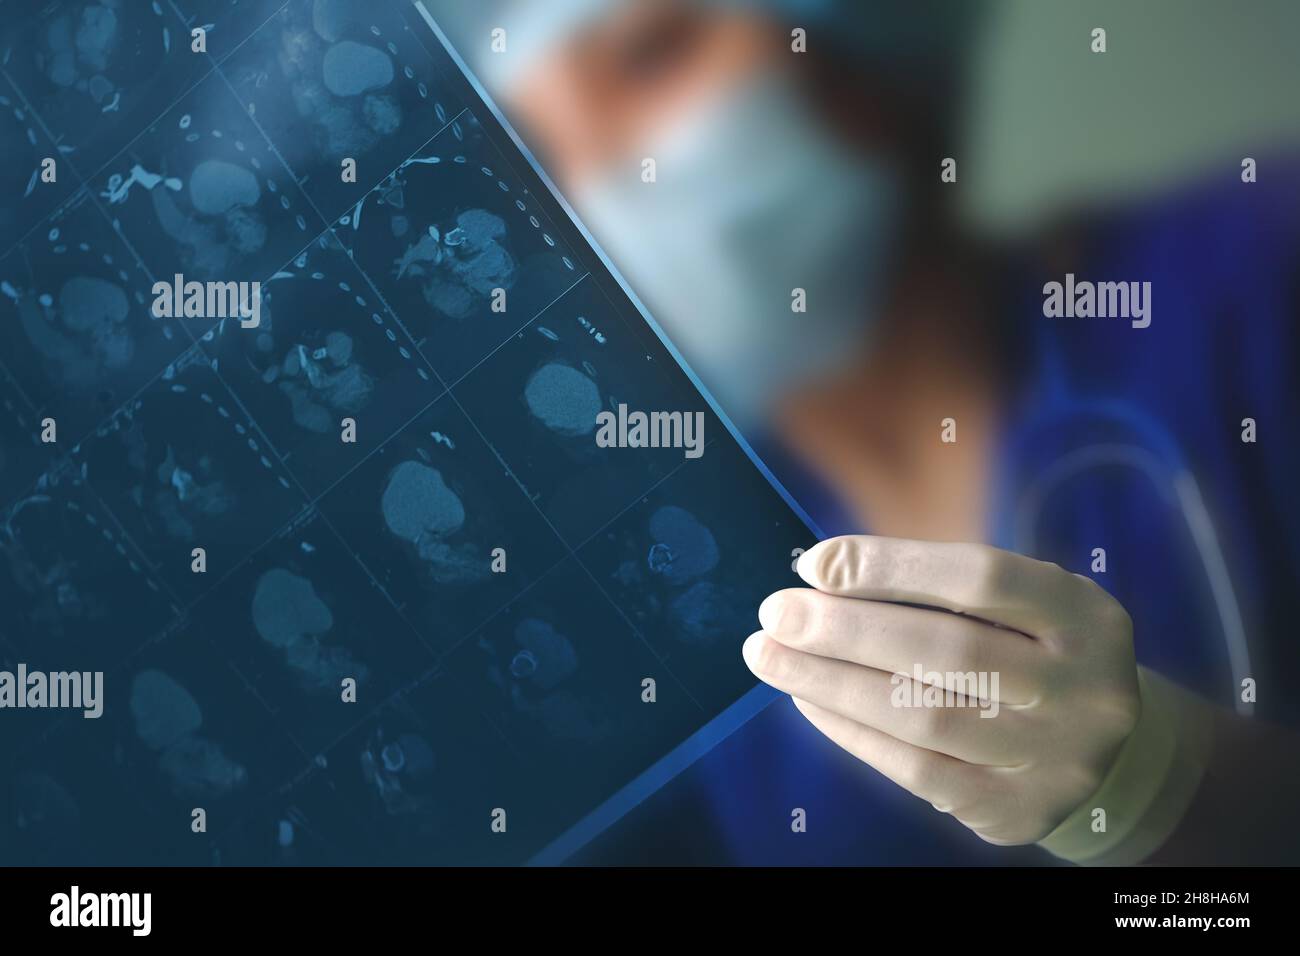 Female doctor scrutinizes patient's scan image. Stock Photo